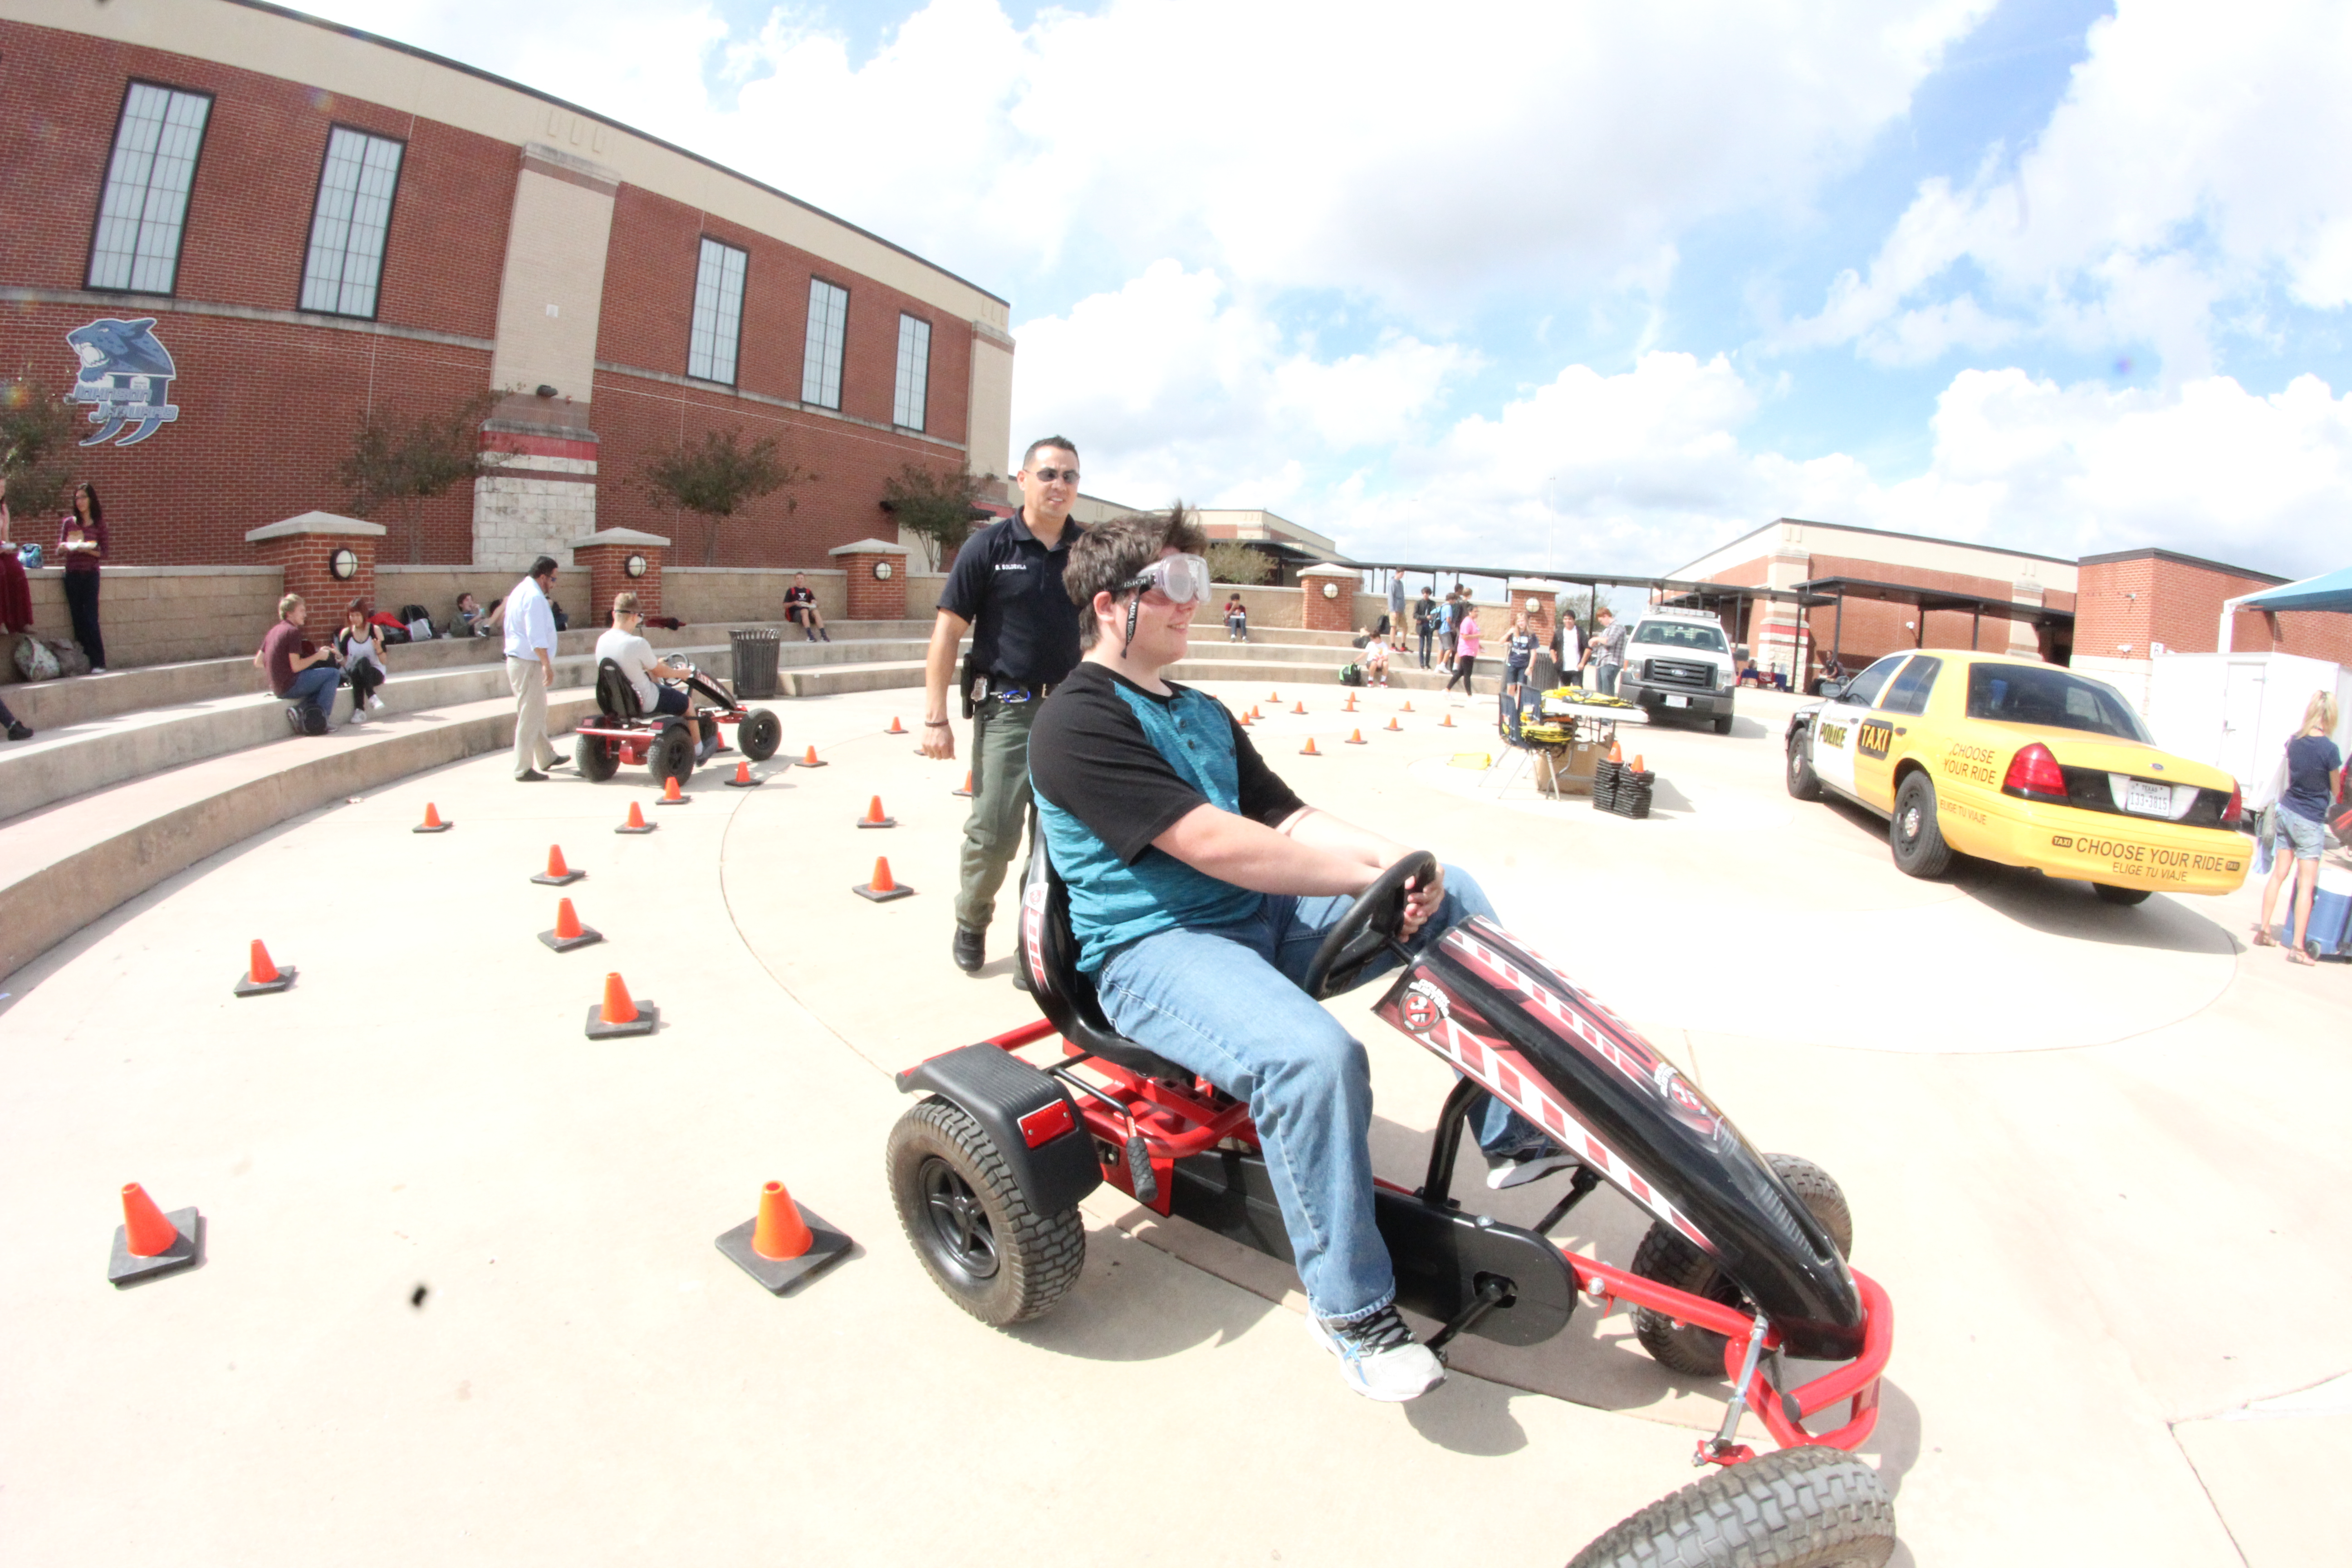 Safe Driving event on campus